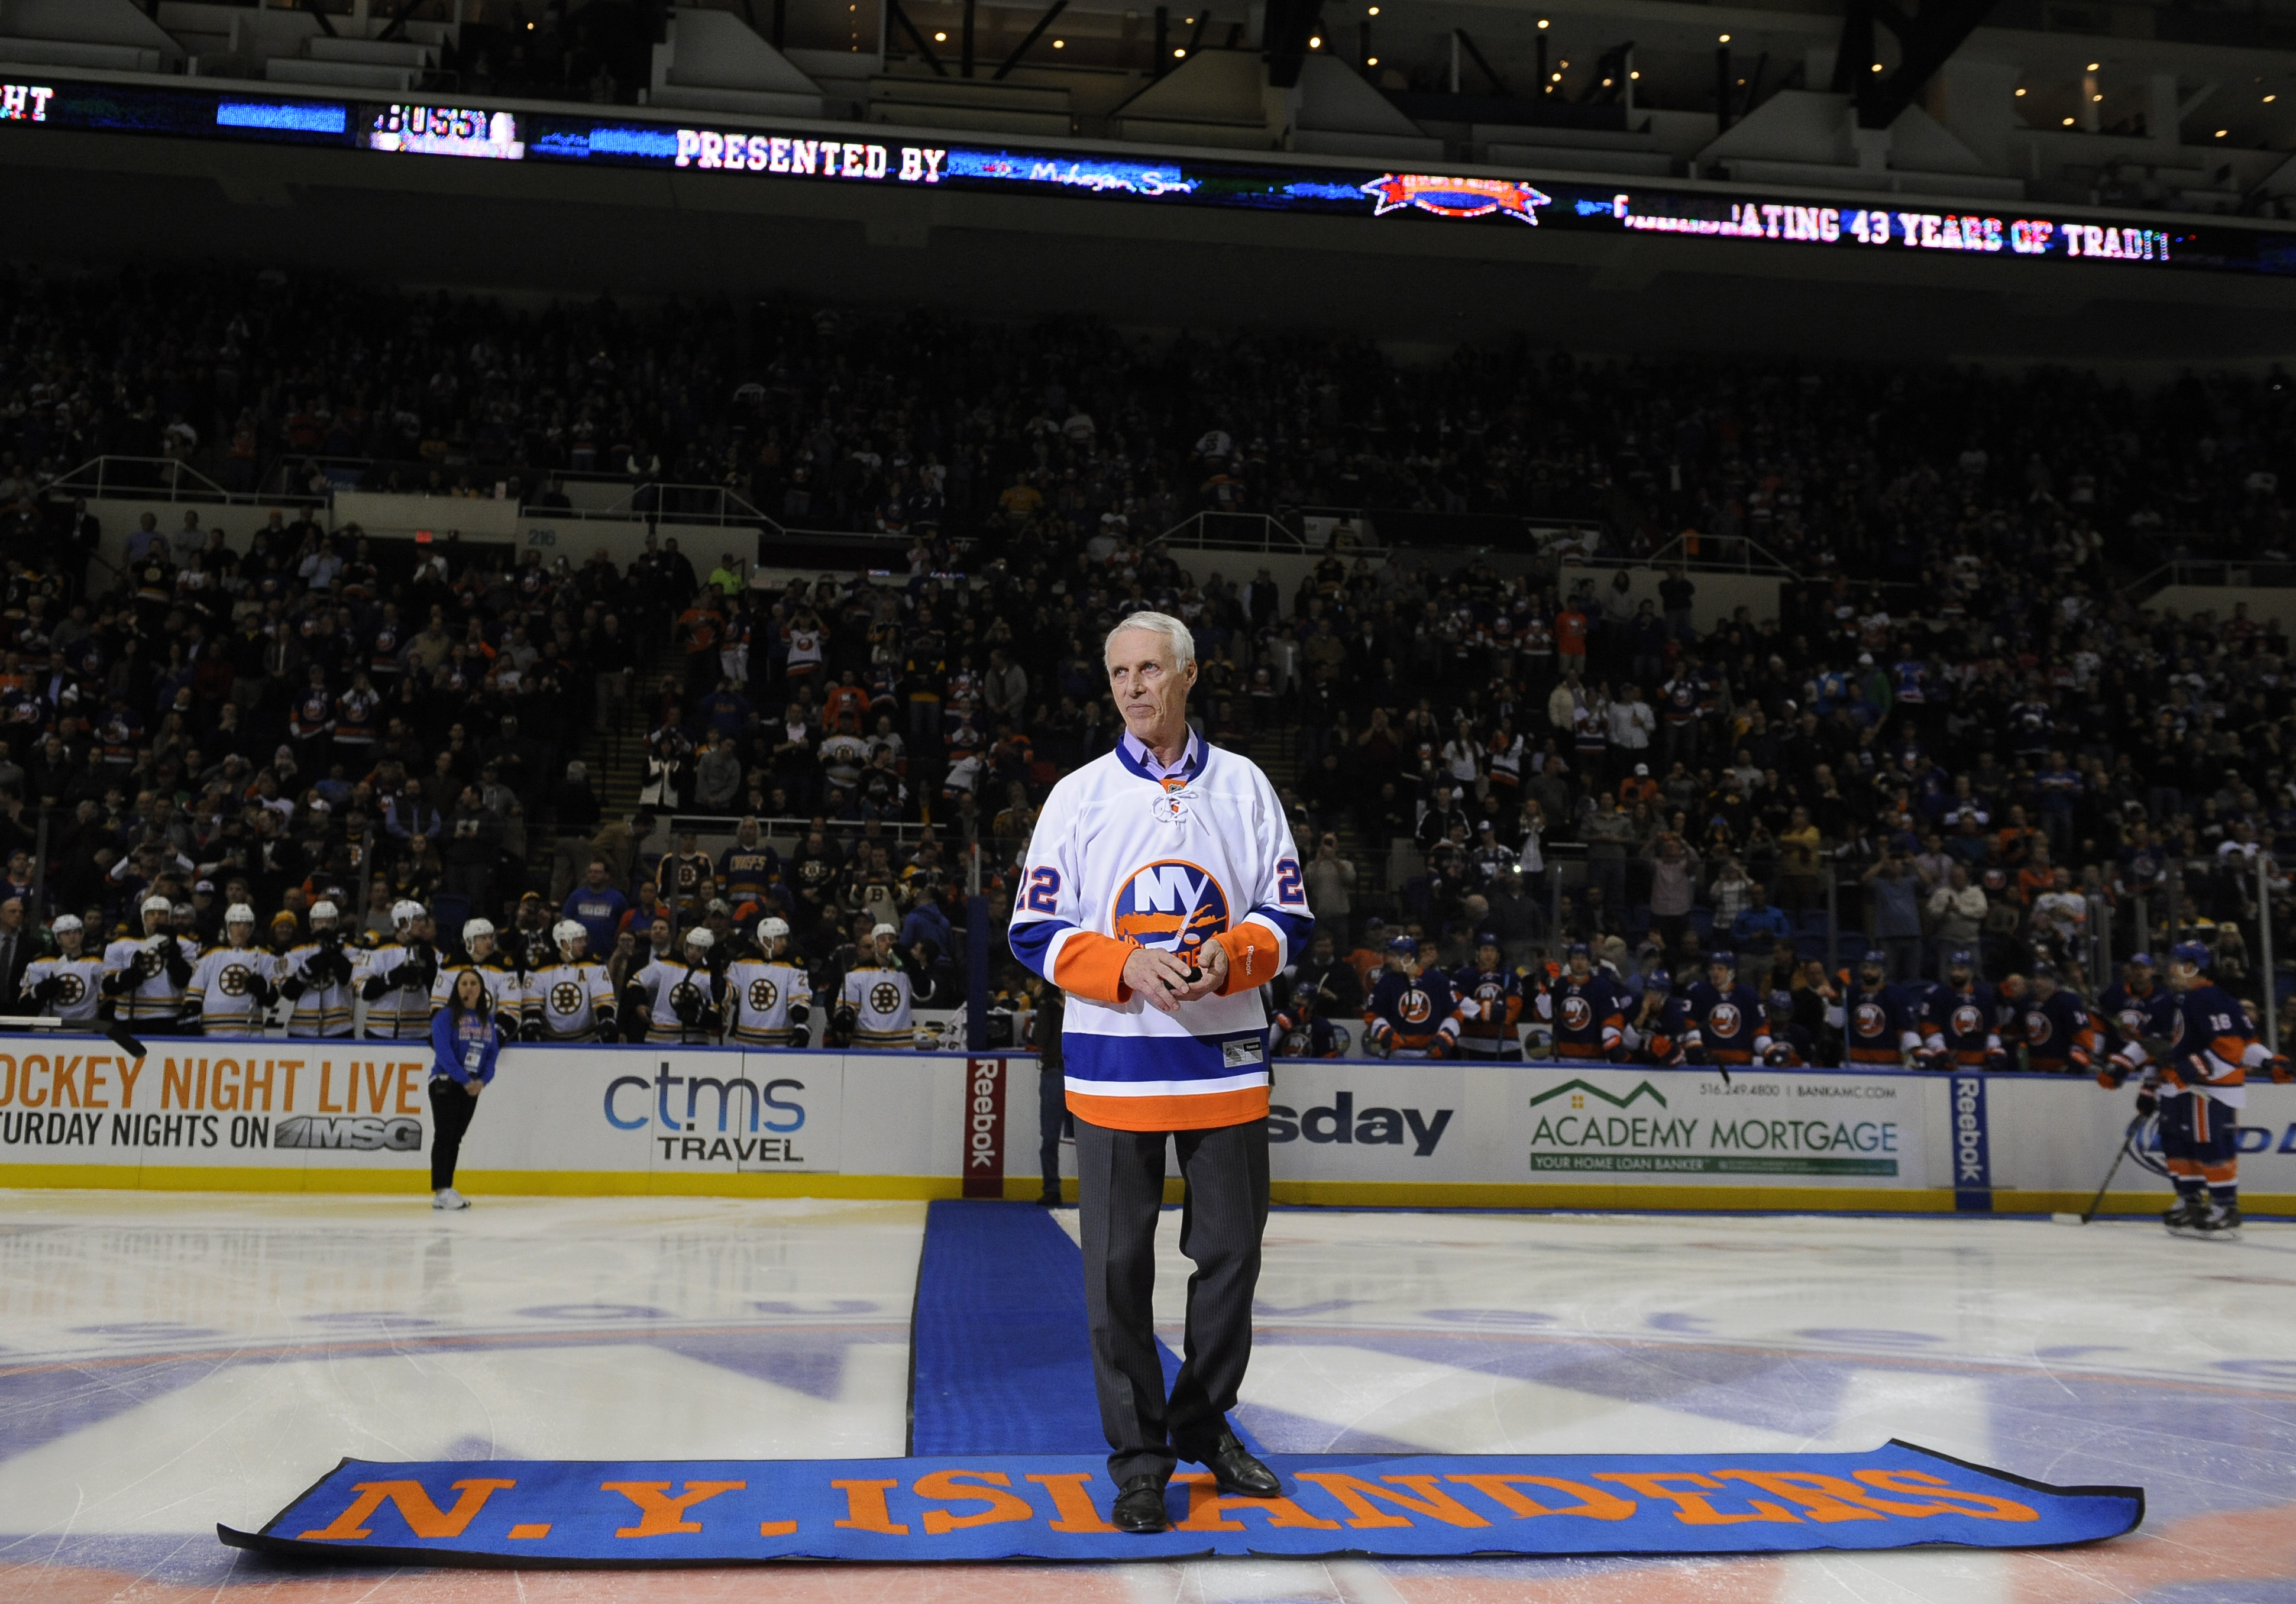 Mike Bossy, Islanders Hall of Famer and four-time Stanley Cup